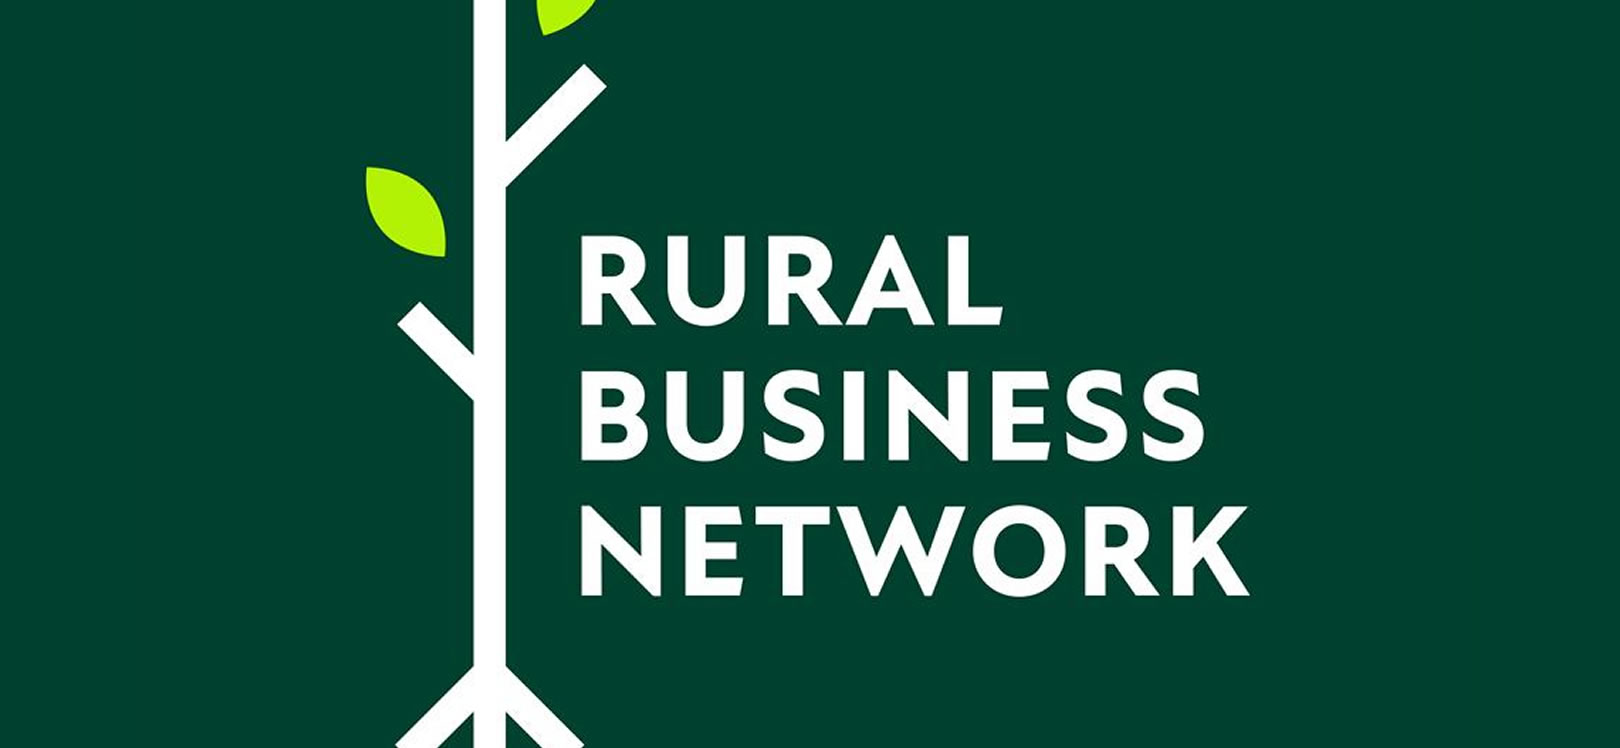 Rural Business Network